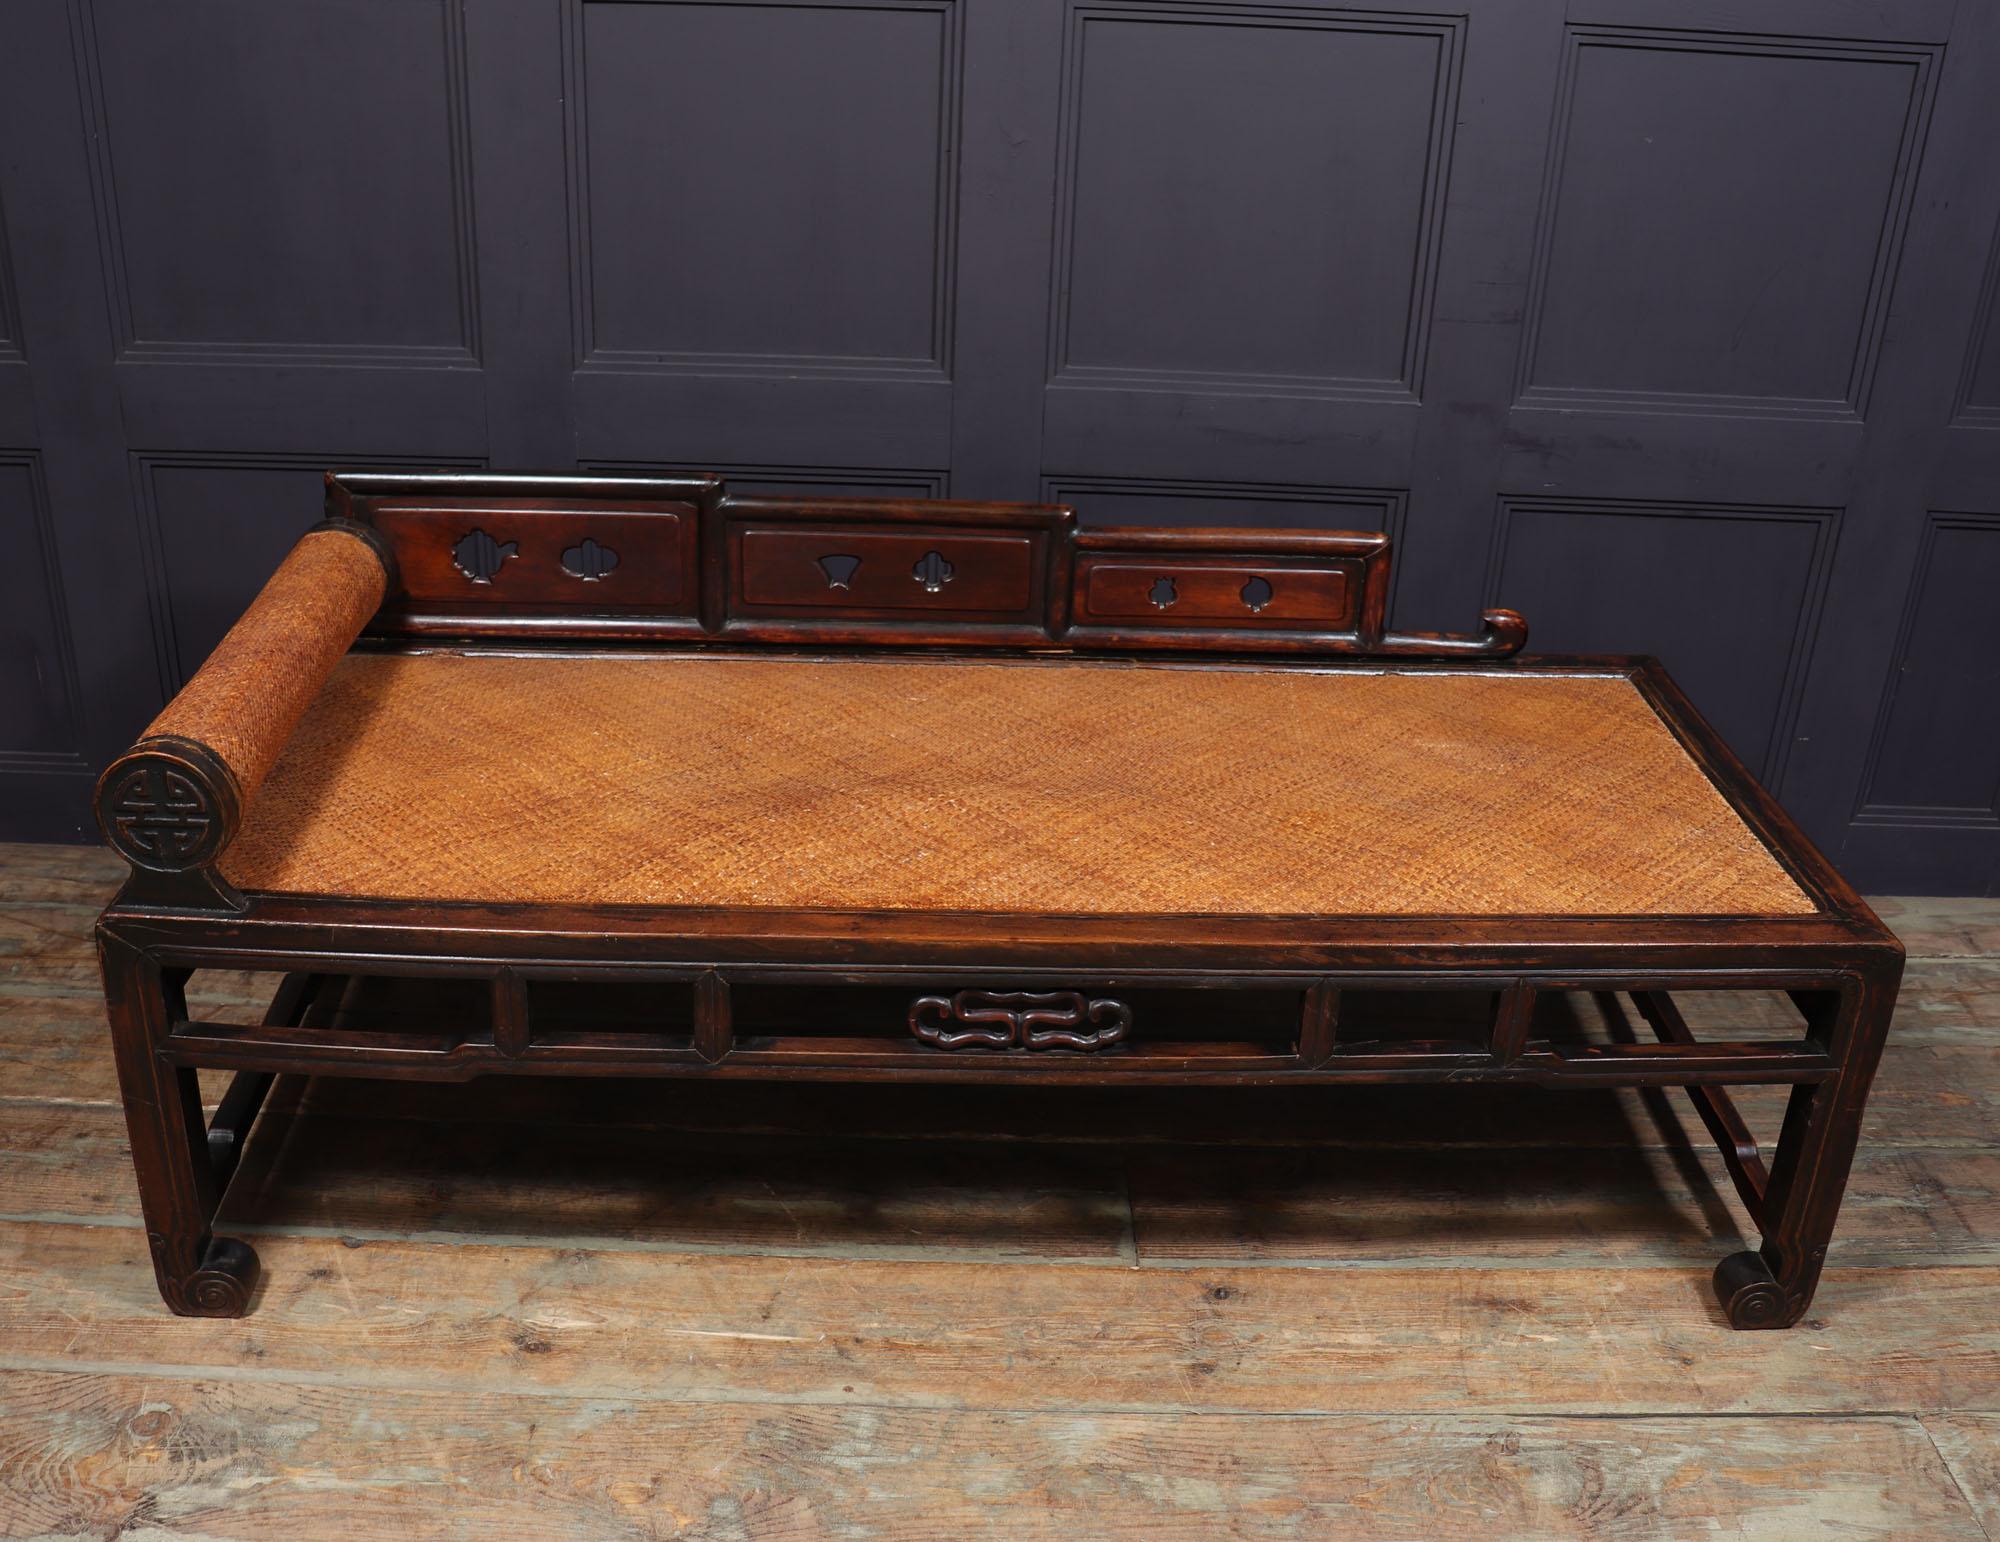 Rattan Antique Chinese Hardwood Daybed, C1820